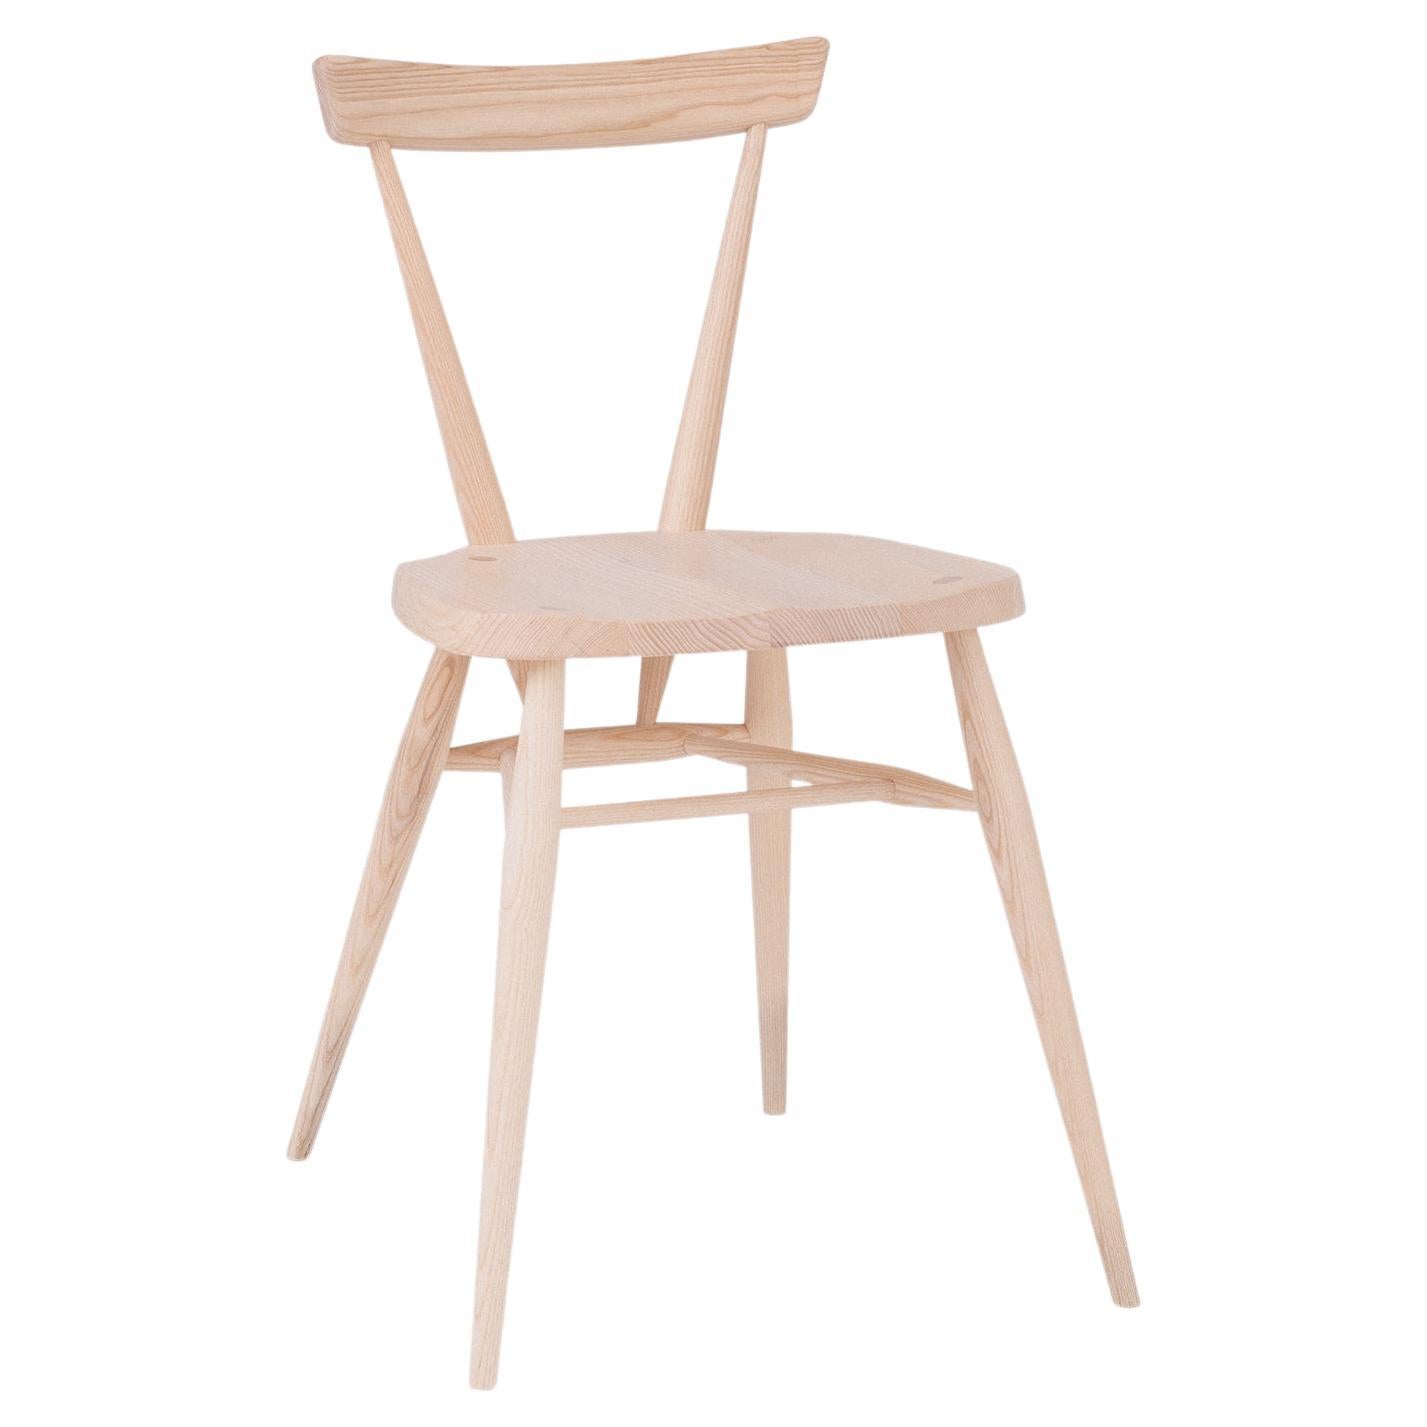 When decorating a space, functionality and aesthetic appeal are often regarded with equal importance. The STACKING CHAIR unites these two principles in a precise, streamlined form, deliberately designed for optimal comfort, ease of use and